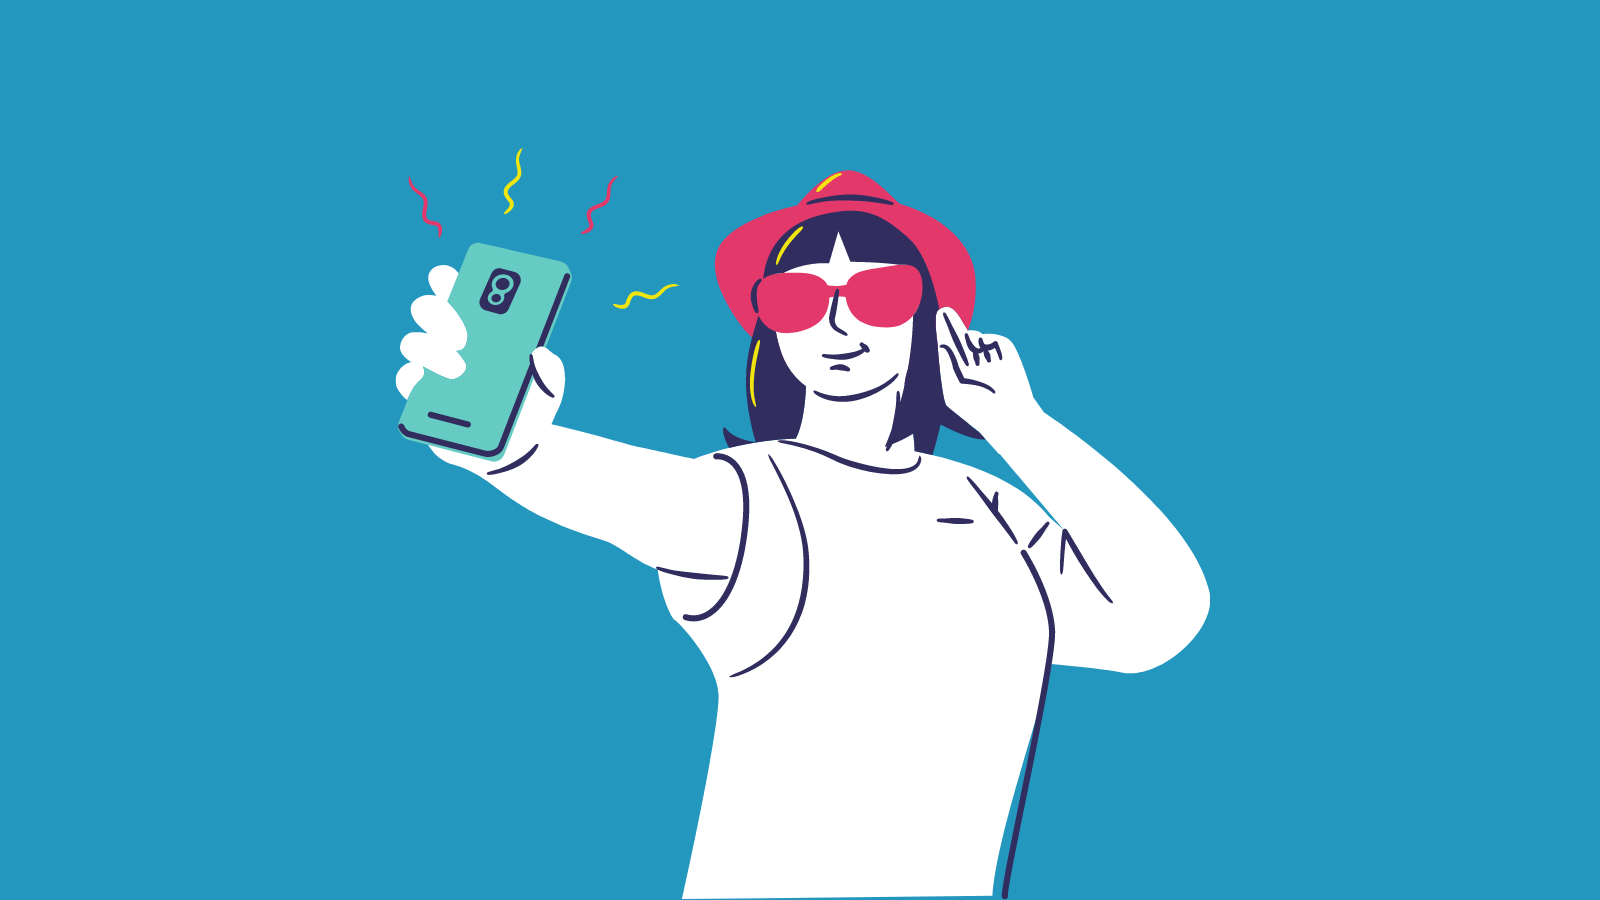 An illustration of a person taking a selfie